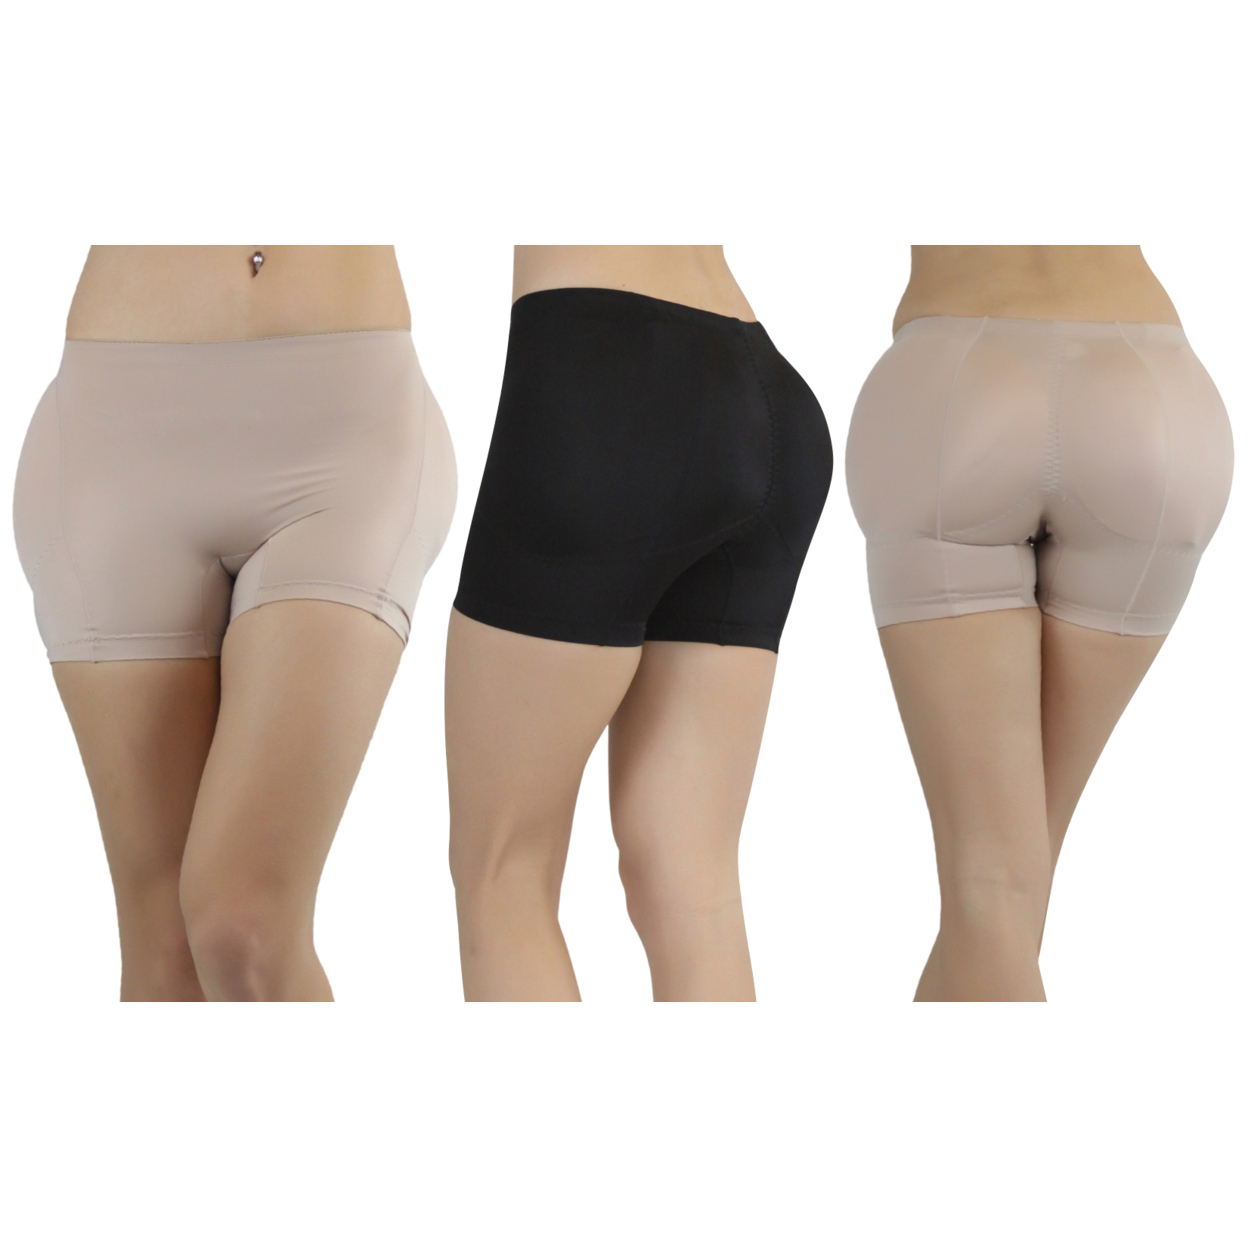 1 Or 2 Pack Of Women Butt And Hip Padded Shaper - Beige & Black, Small